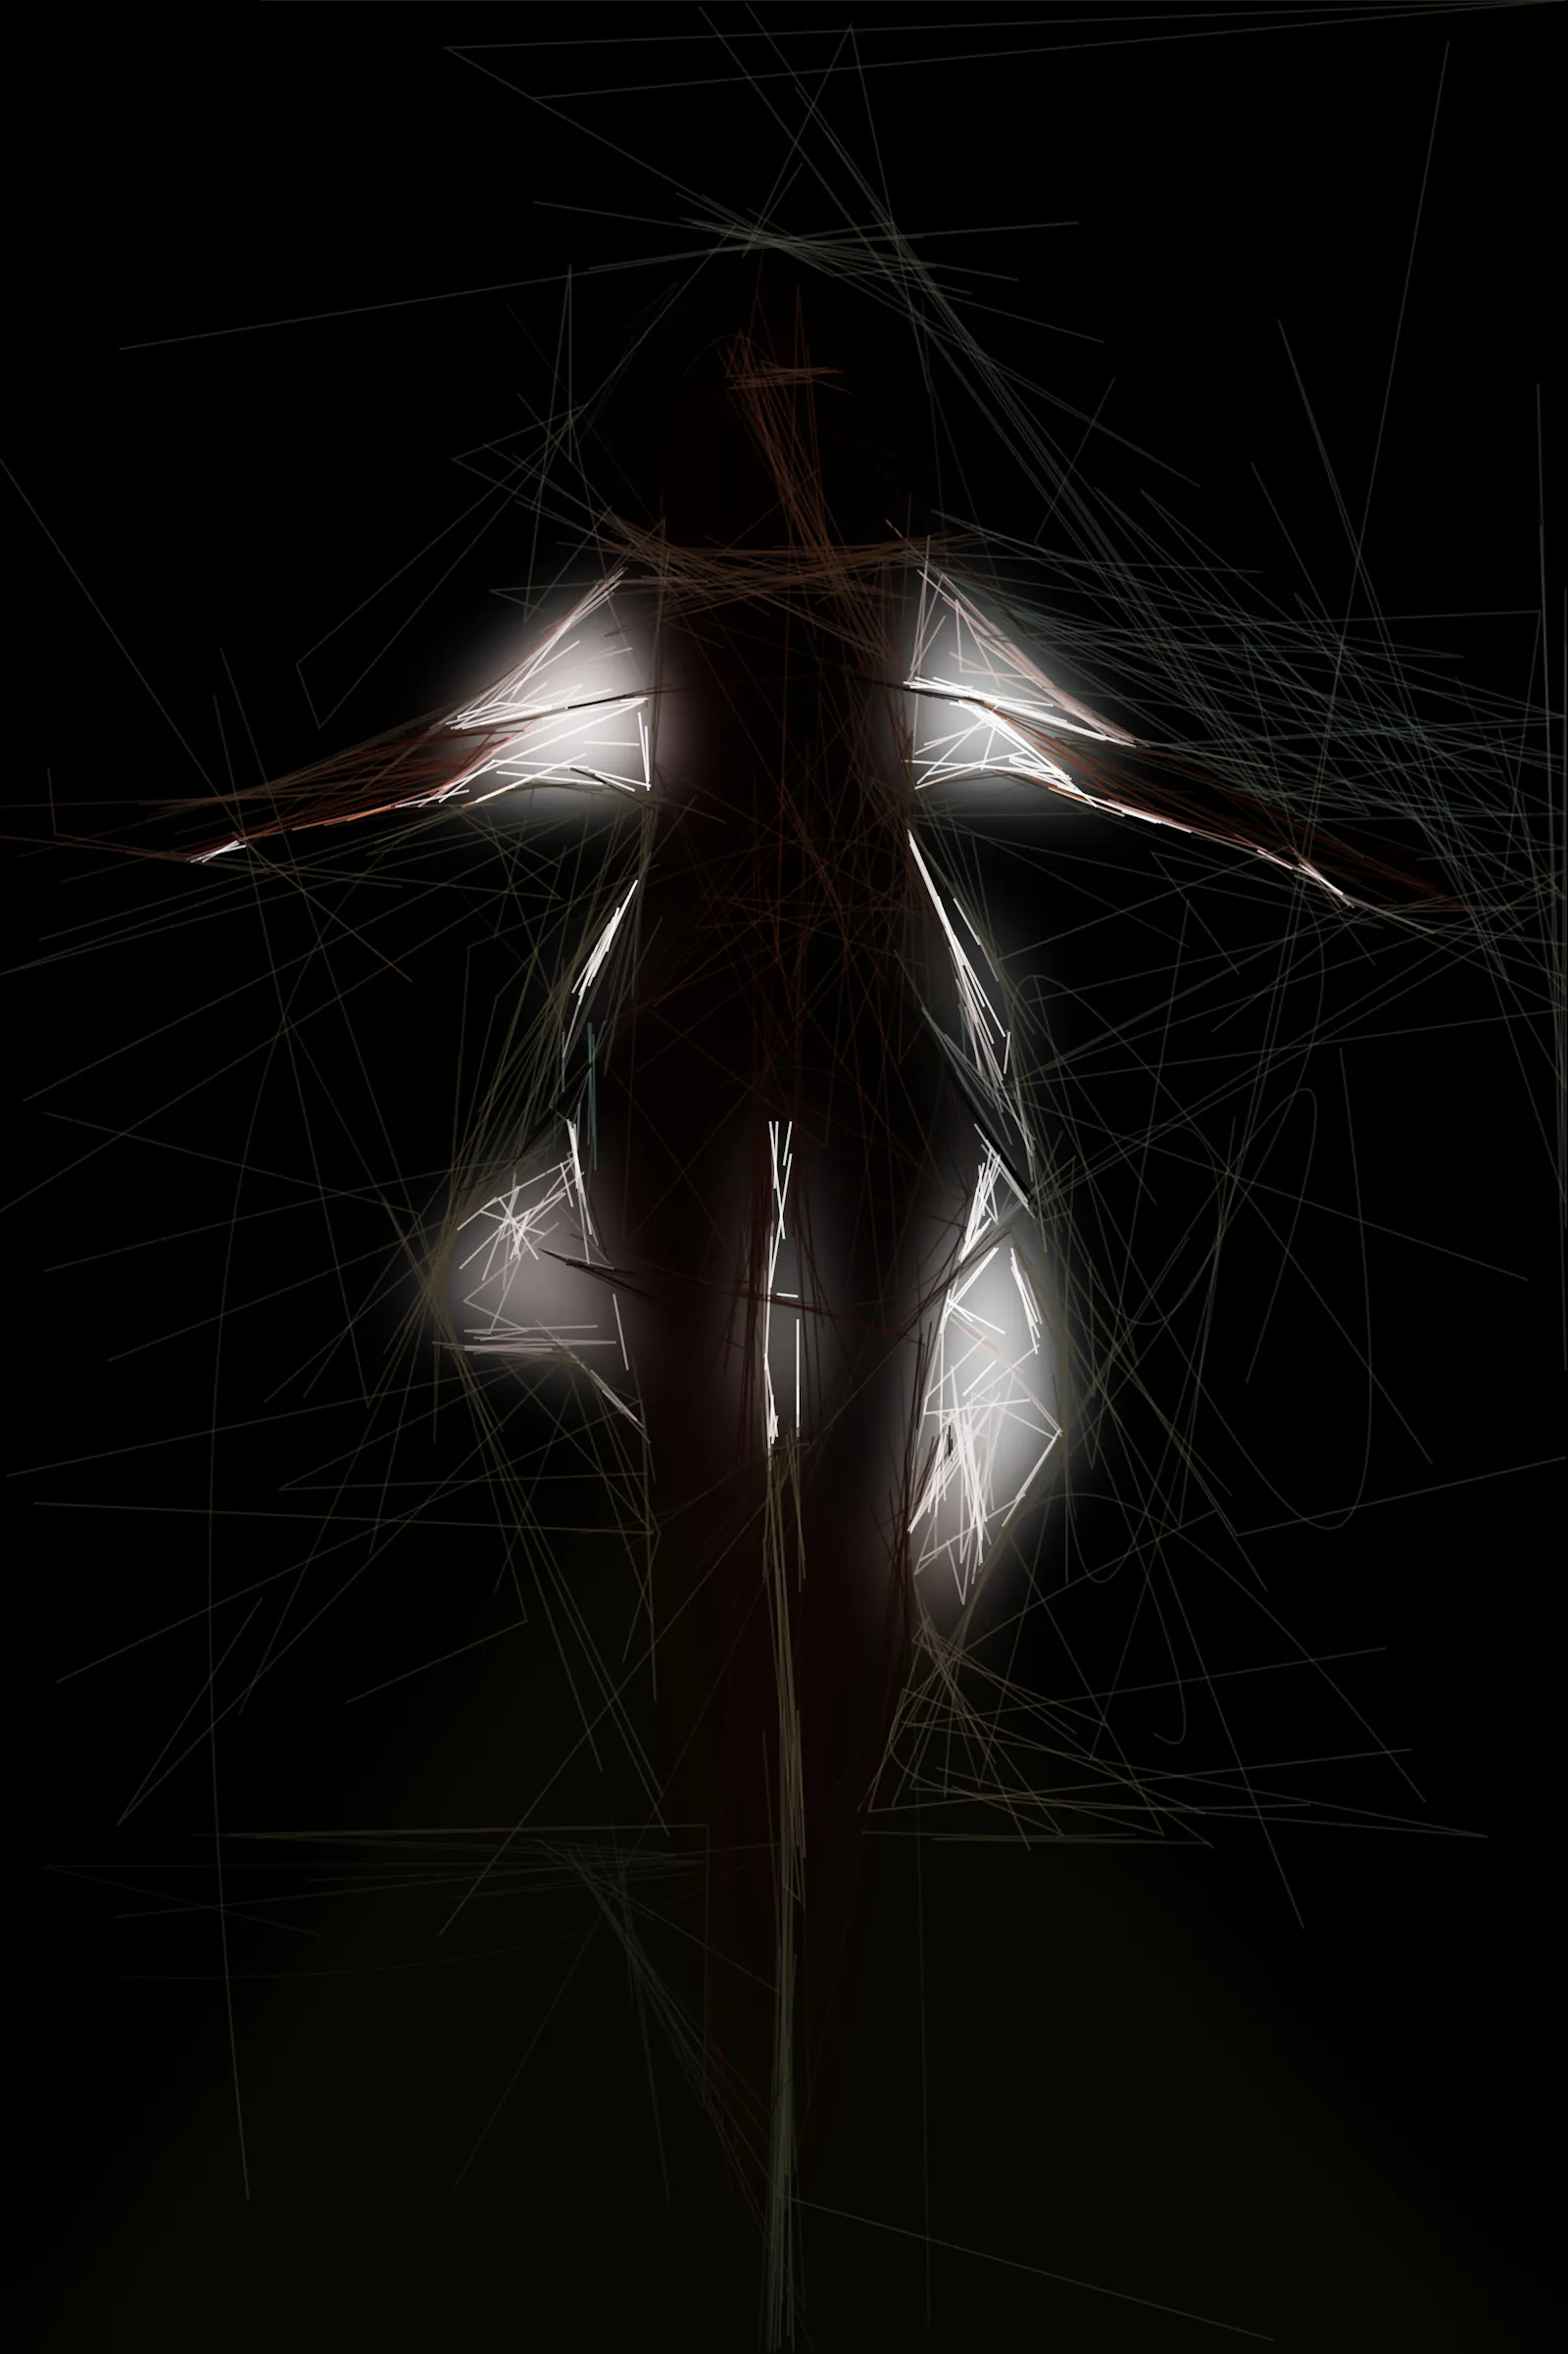 The light is behind her as she flies, lighting up her robe. The lines could be seen, at least, to make that image.